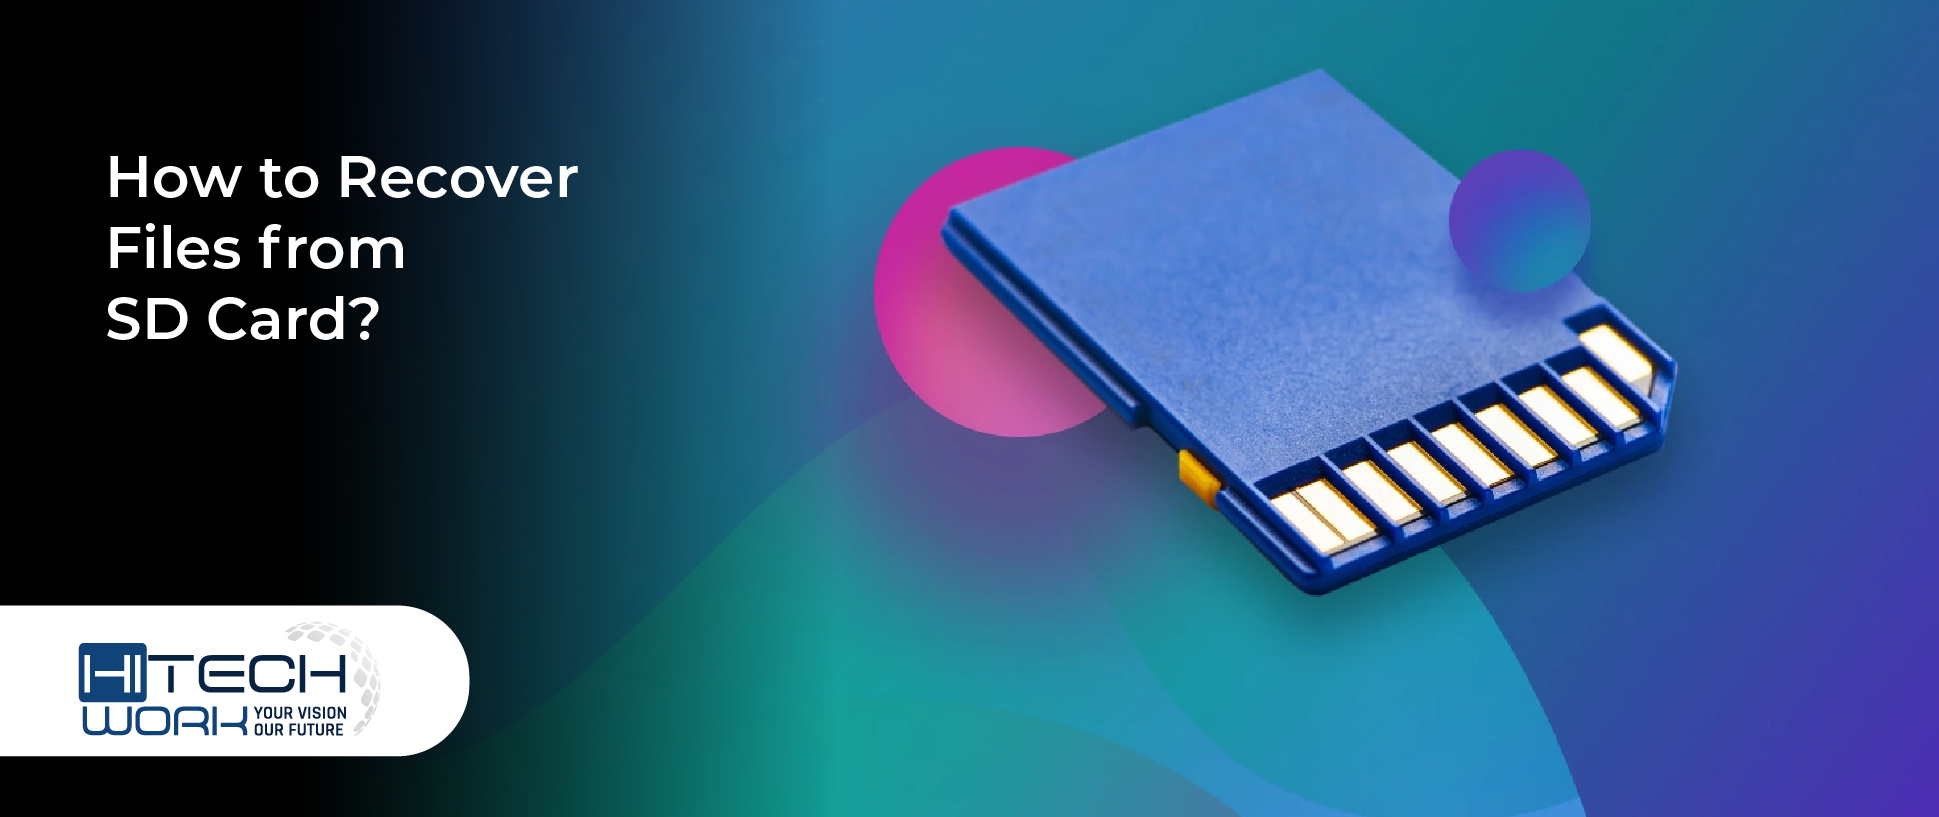 How to Recover Files from SD Card